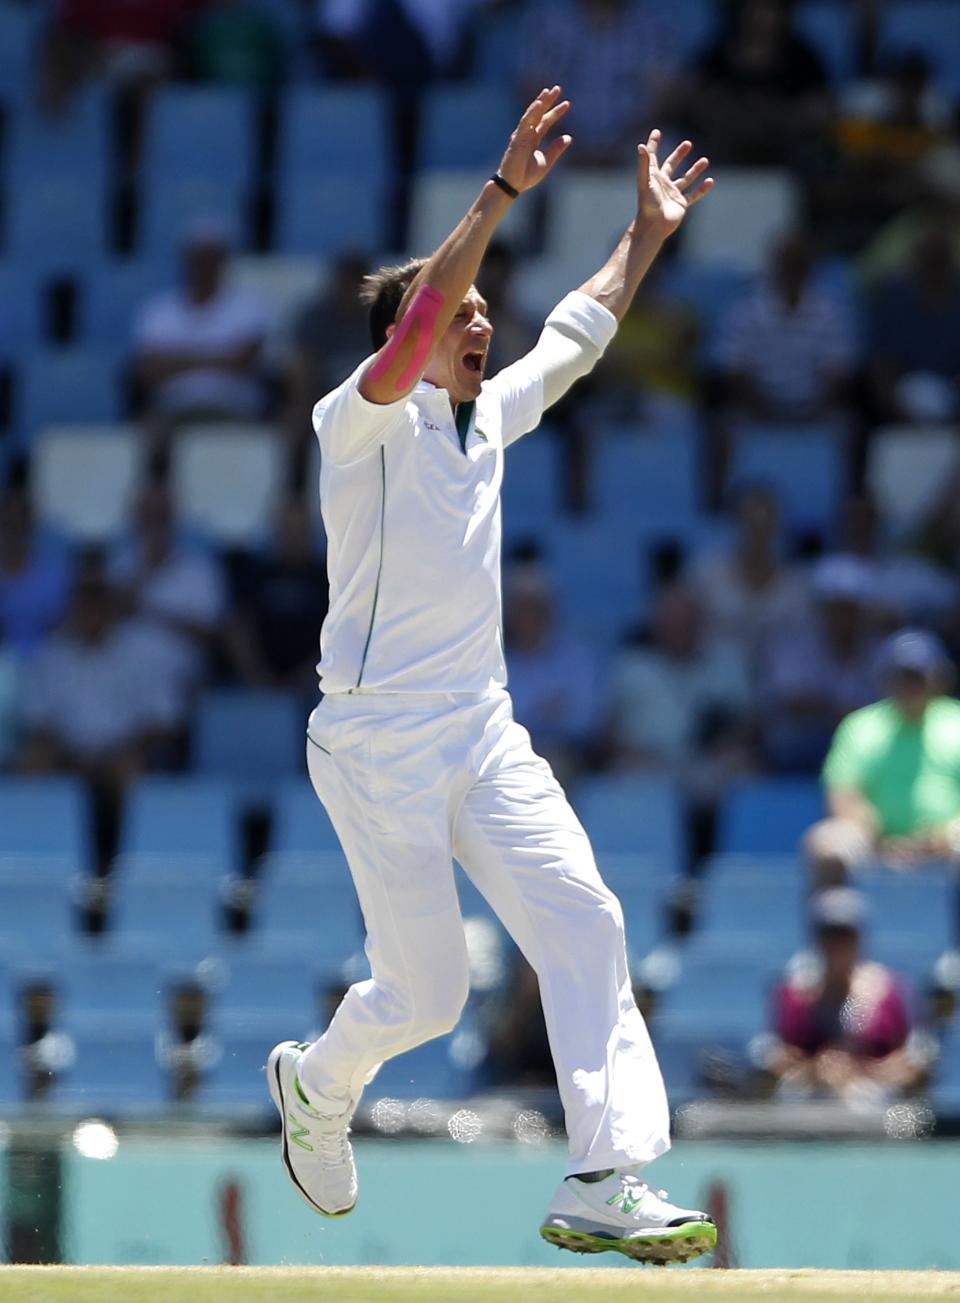 South Africa's Dale Steyn appeals unsuccessfully during the first day of their cricket test match against Australia in Centurion February 12, 2014.